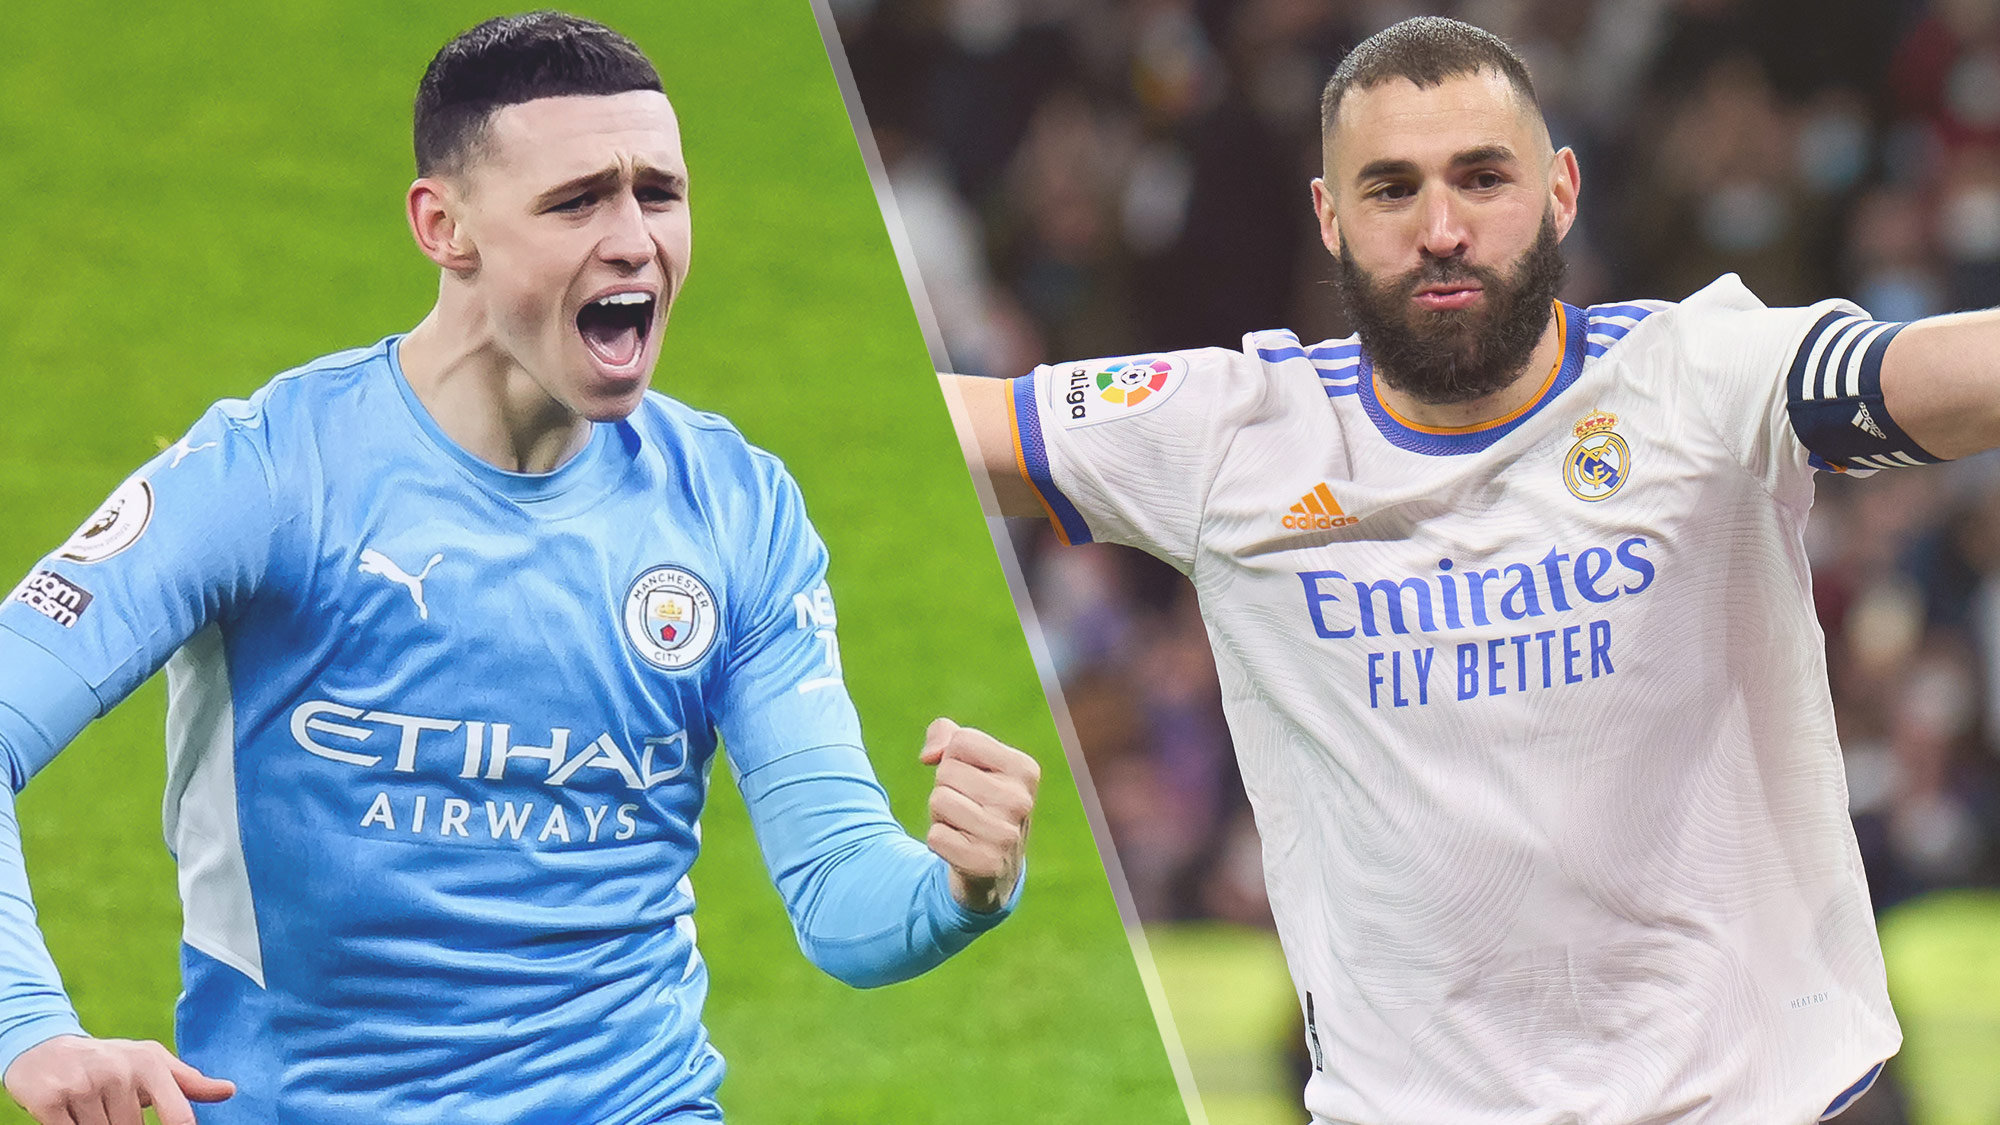 Manchester City vs Real Madrid live stream: How to watch Champions League semi-final online